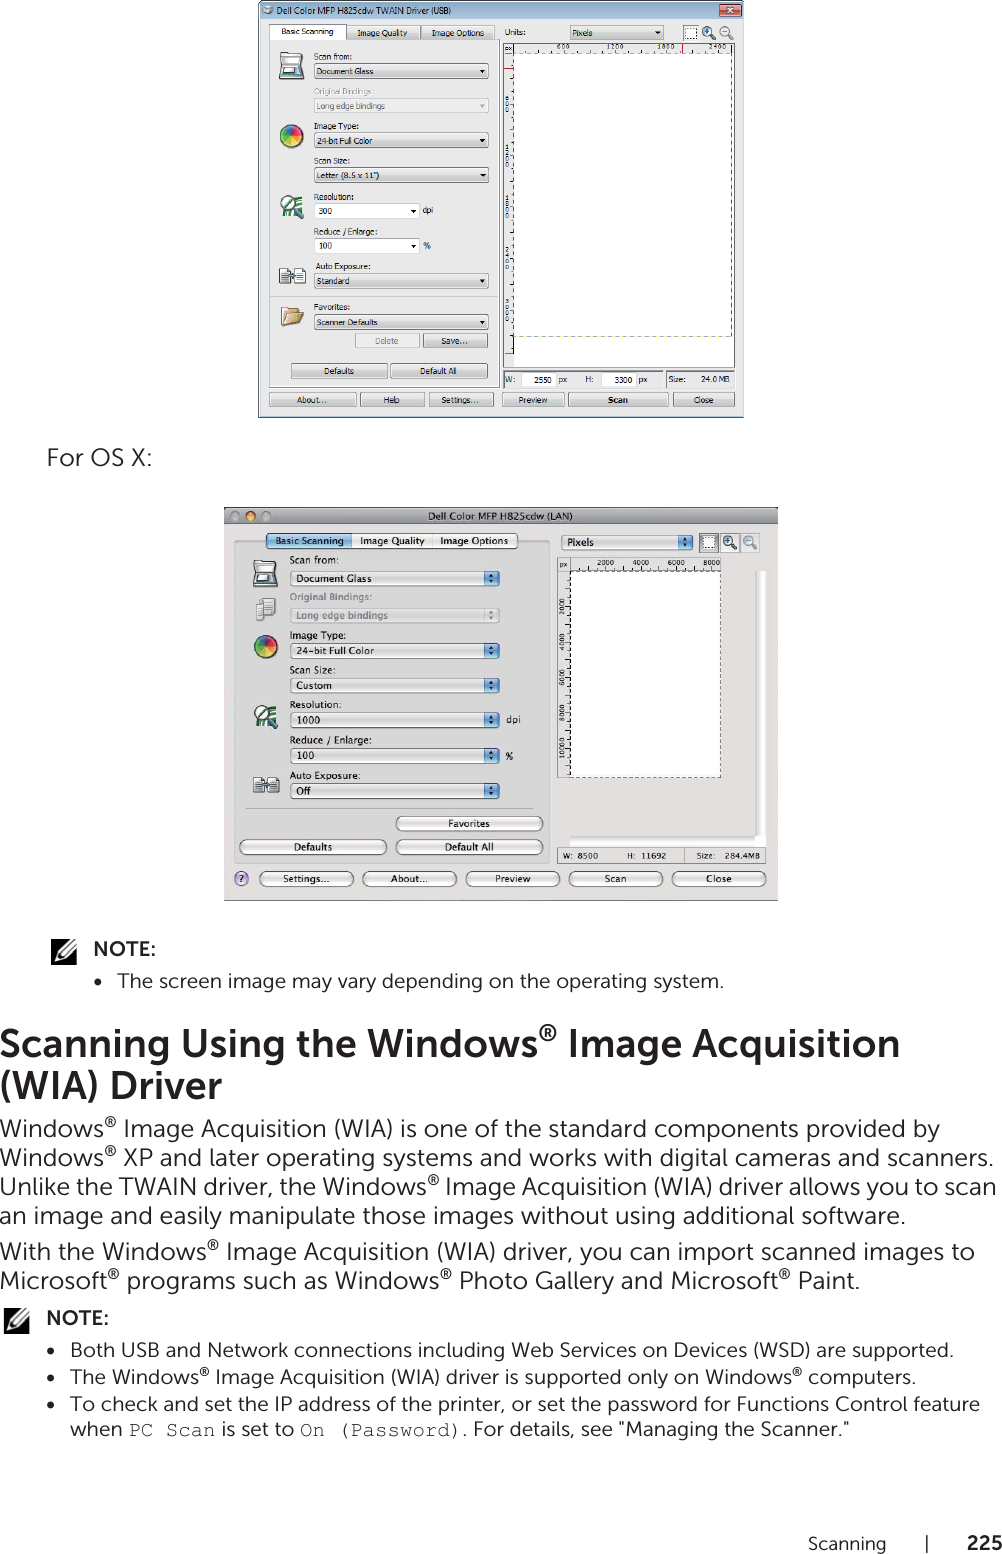 Scanning |225For OS X:NOTE:•The screen image may vary depending on the operating system.Scanning Using the Windows® Image Acquisition (WIA) DriverWindows® Image Acquisition (WIA) is one of the standard components provided by Windows® XP and later operating systems and works with digital cameras and scanners. Unlike the TWAIN driver, the Windows® Image Acquisition (WIA) driver allows you to scan an image and easily manipulate those images without using additional software.With the Windows® Image Acquisition (WIA) driver, you can import scanned images to Microsoft® programs such as Windows® Photo Gallery and Microsoft® Paint.NOTE:•Both USB and Network connections including Web Services on Devices (WSD) are supported.•The Windows® Image Acquisition (WIA) driver is supported only on Windows® computers.•To check and set the IP address of the printer, or set the password for Functions Control feature when PC Scan is set to On (Password). For details, see &quot;Managing the Scanner.&quot;